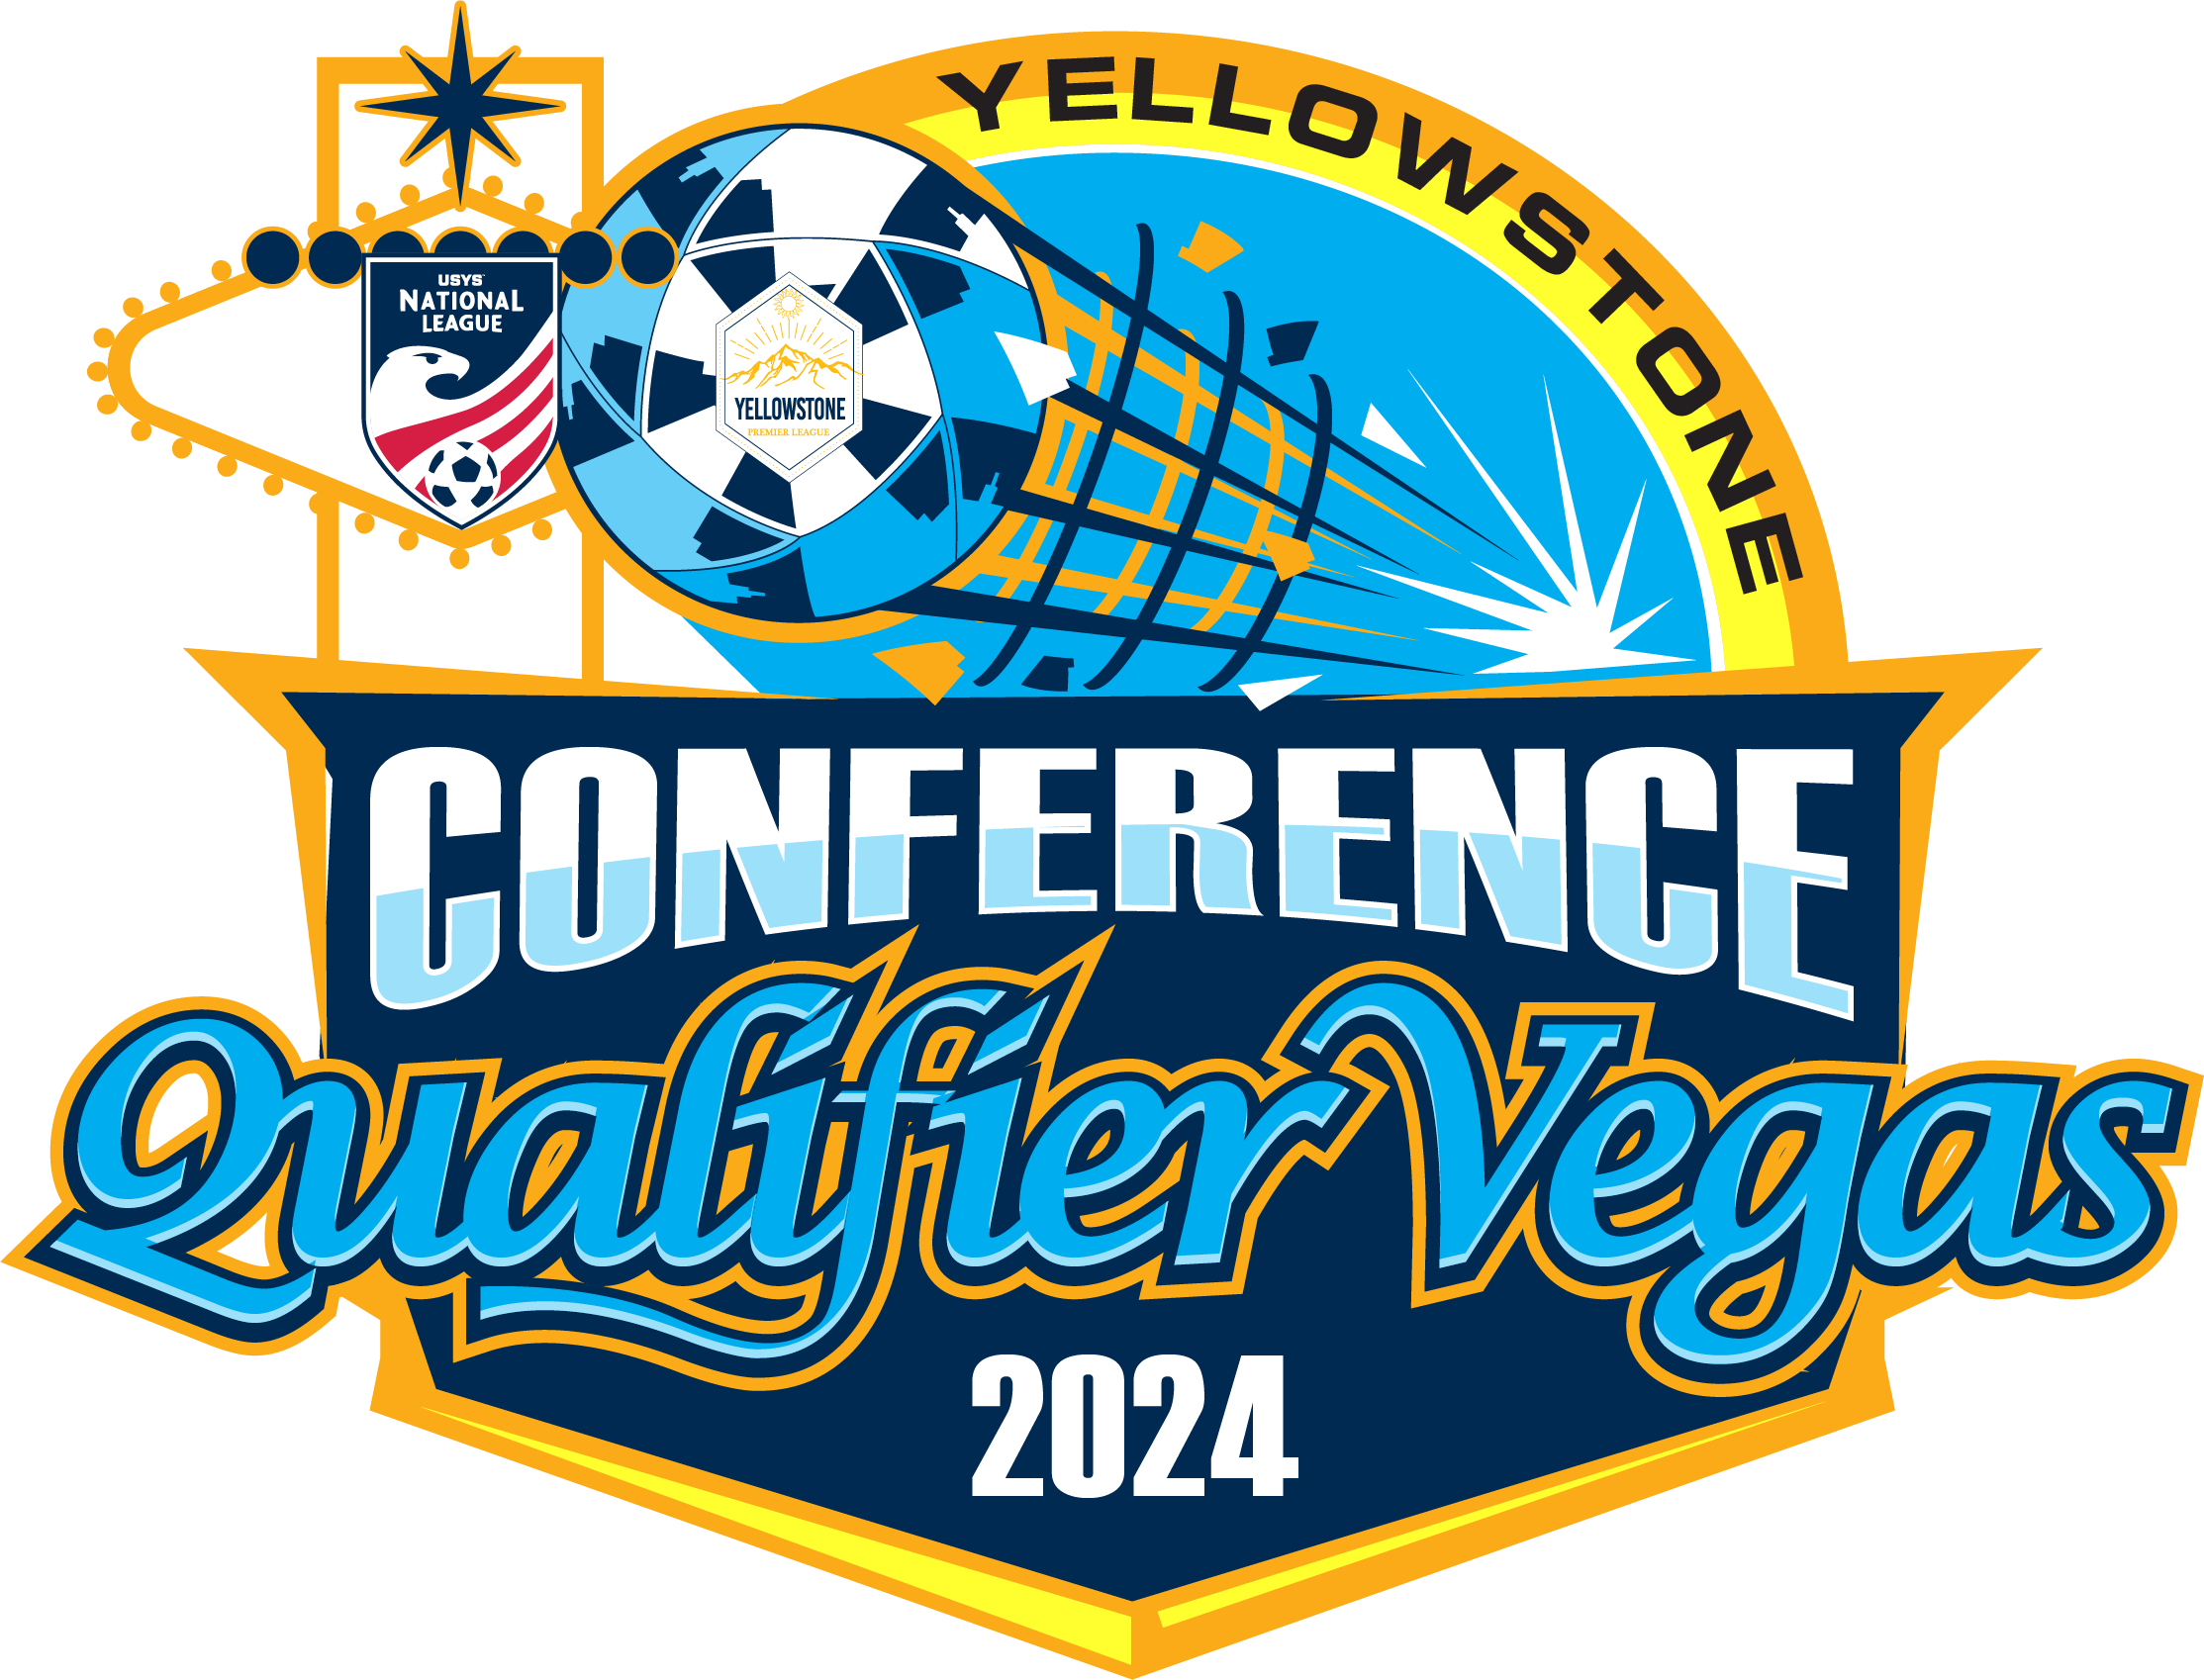 2024 Yellowstone Conference Qualifier Vegas